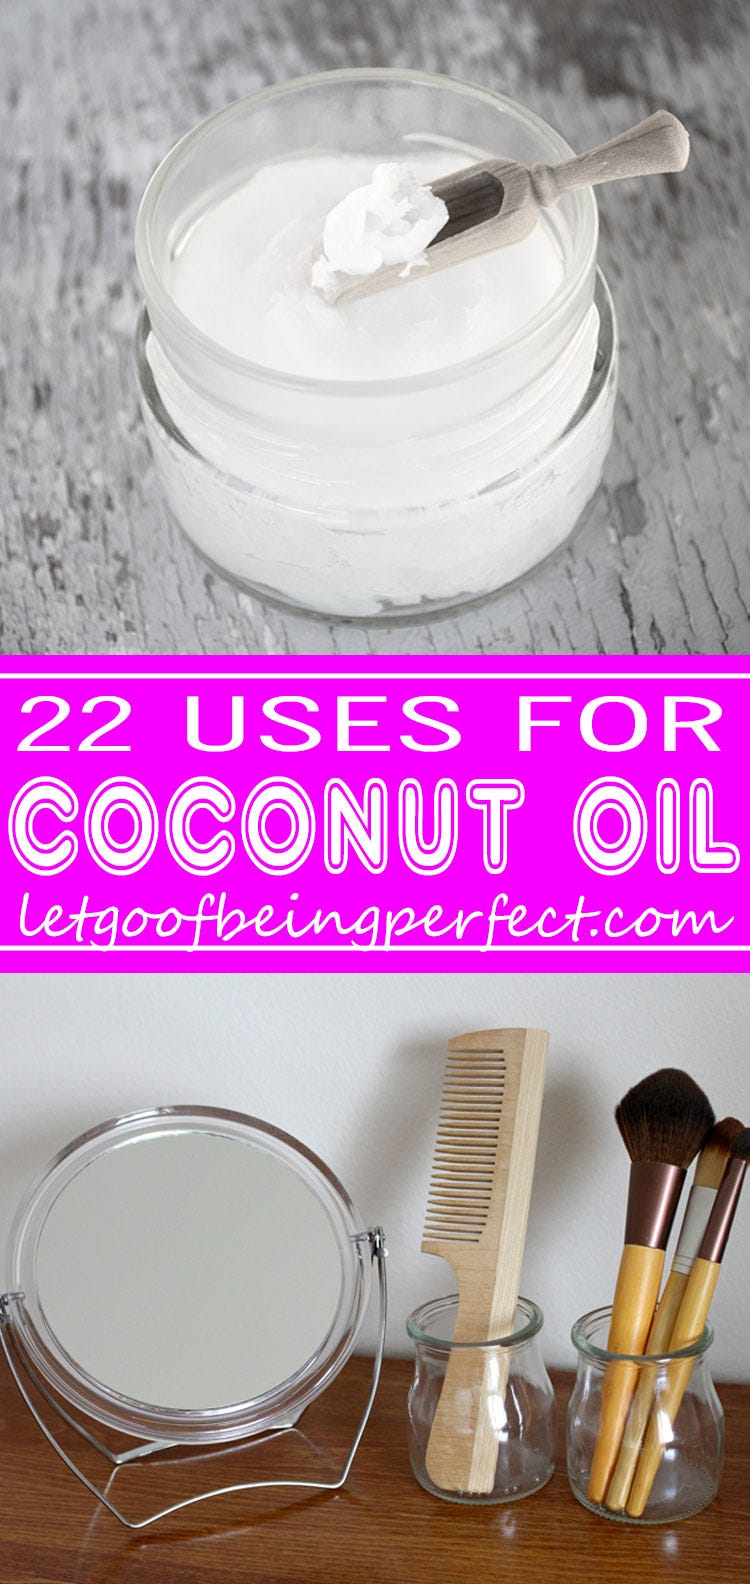 Coconut oil is great for hair and skin! Check out these 22 other awesome uses for coconut oil. You can buy organic, refined coconut oil in the grocery store